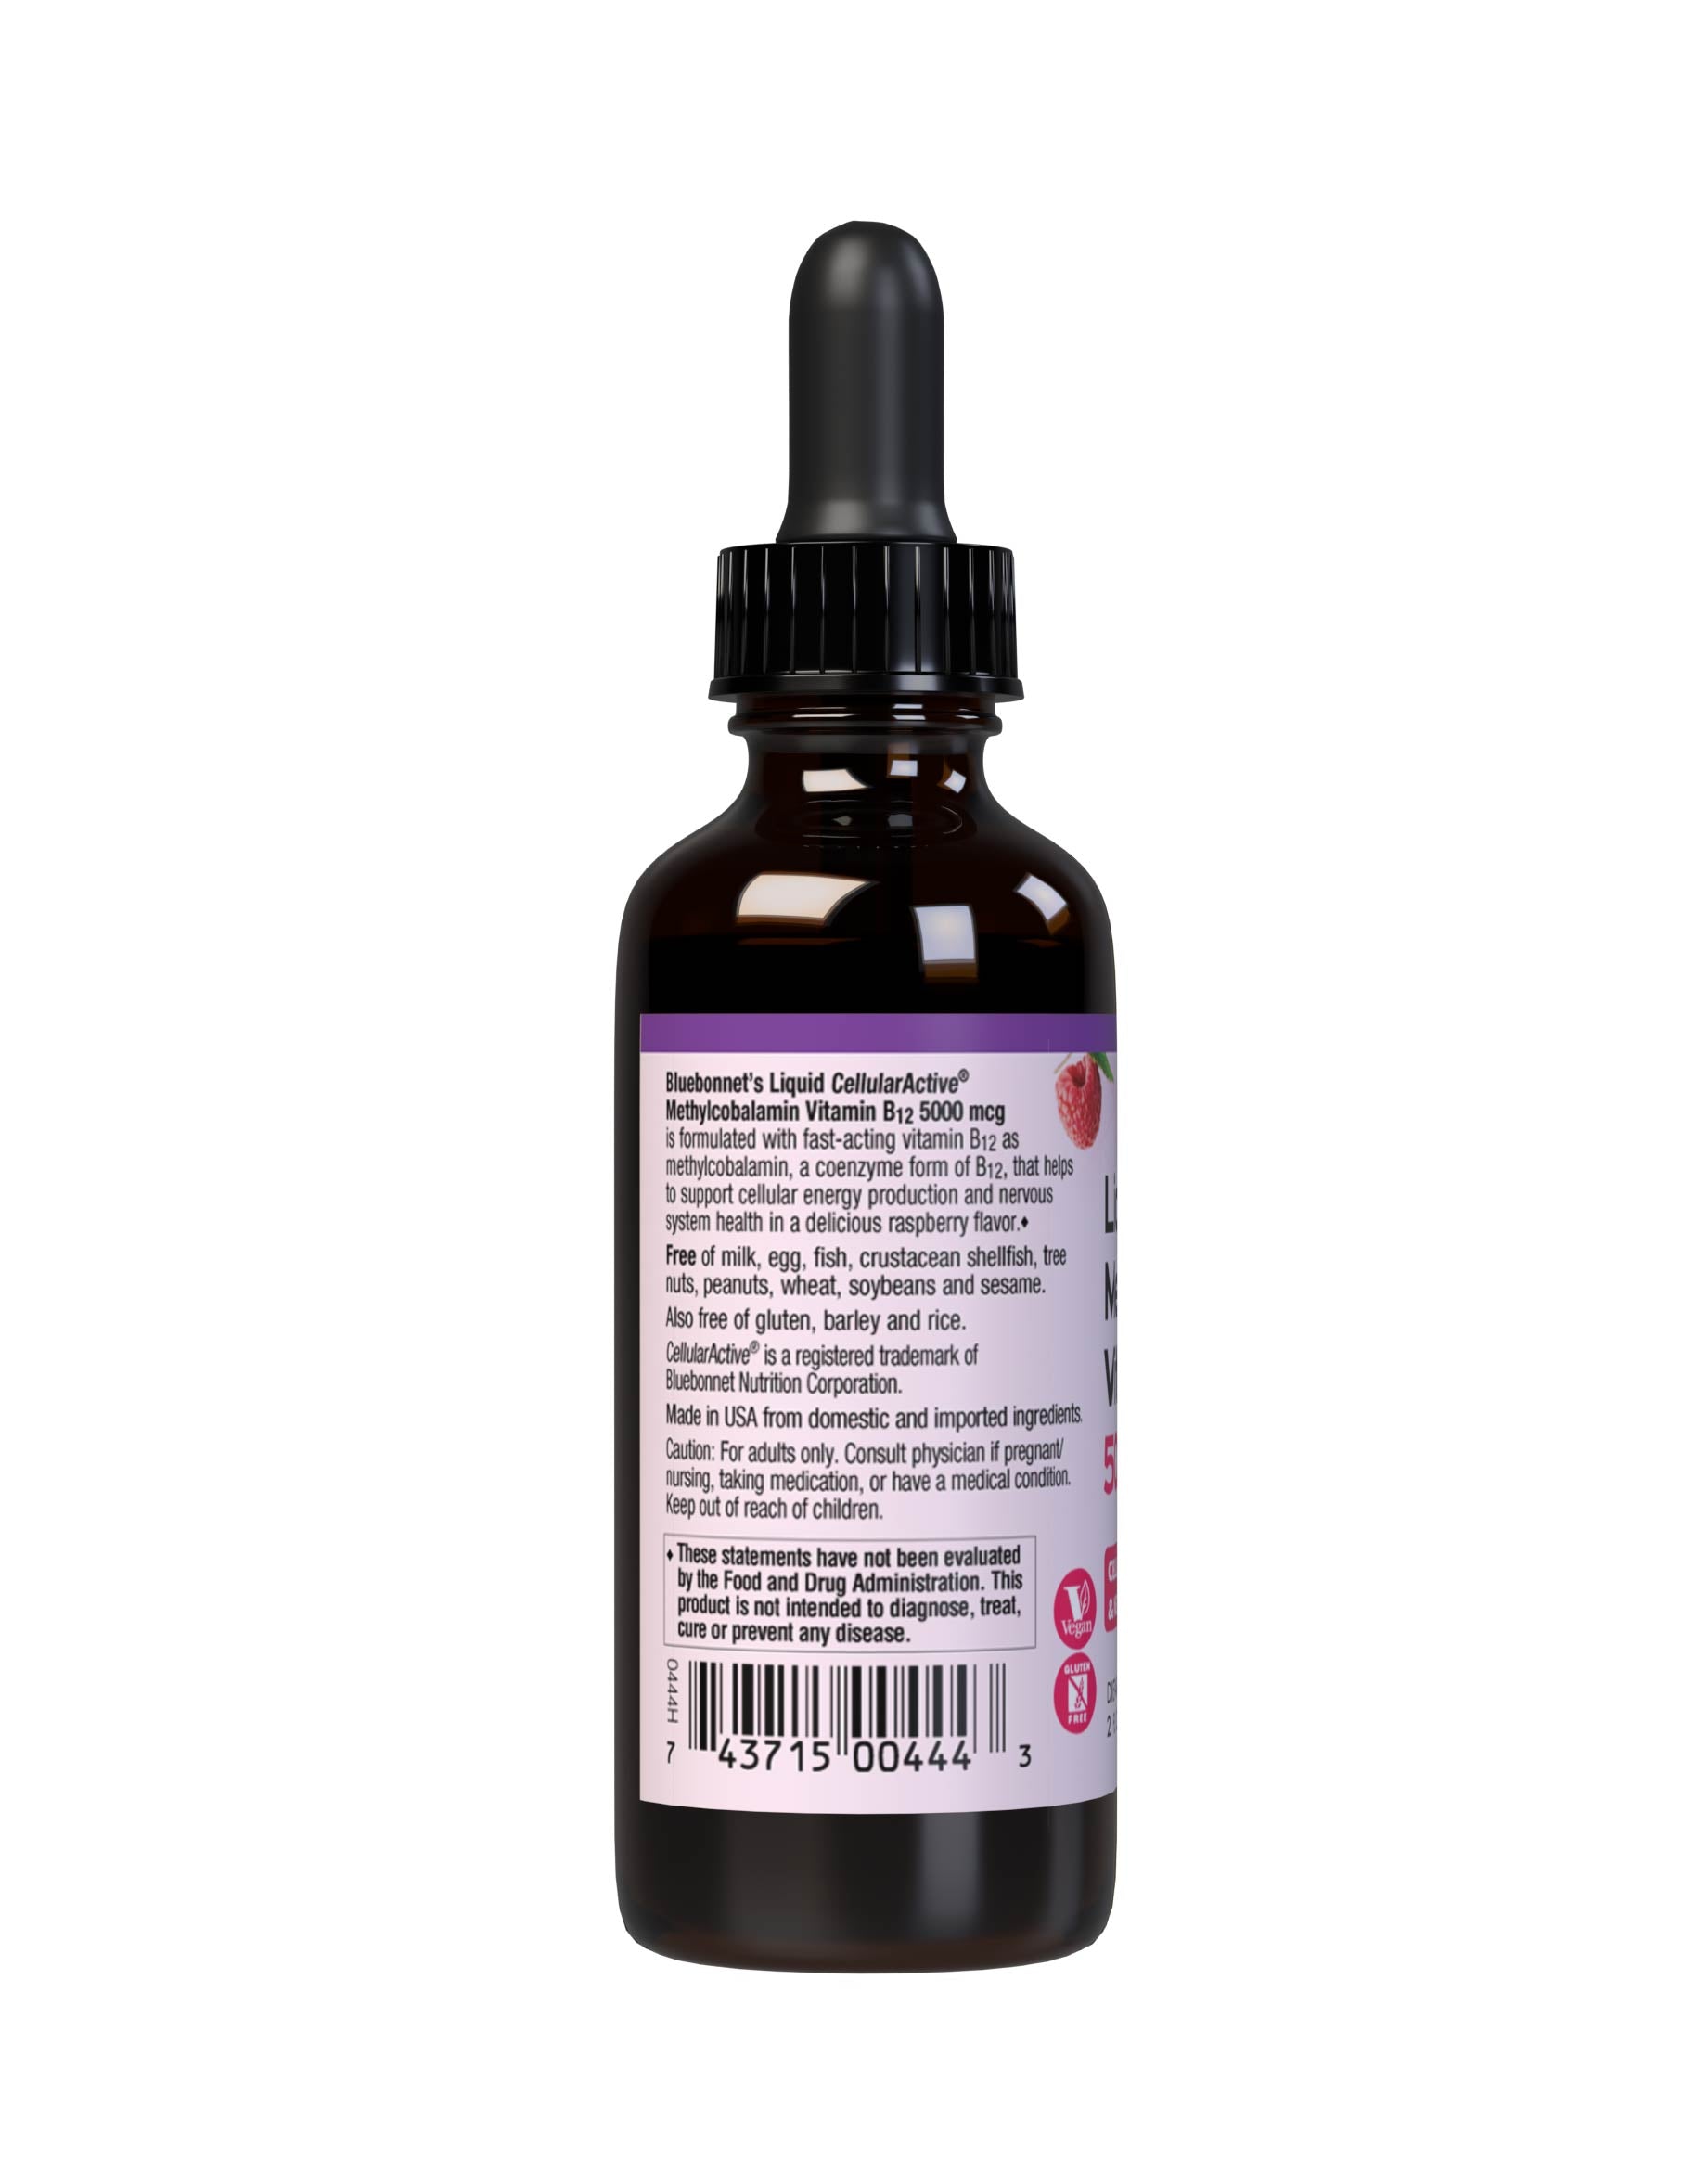 Bluebonnet’s Liquid CellularActive Methylcobalamin Vitamin B12 5000 mcg is formulated with fast-acting vitamin B12 as methylcobalamin, a coenzyme form of B12, which may be better utilized and better retained in the body. Vitamin B12 supports cellular energy production and nervous system health. Description panel. #size_2 fl oz